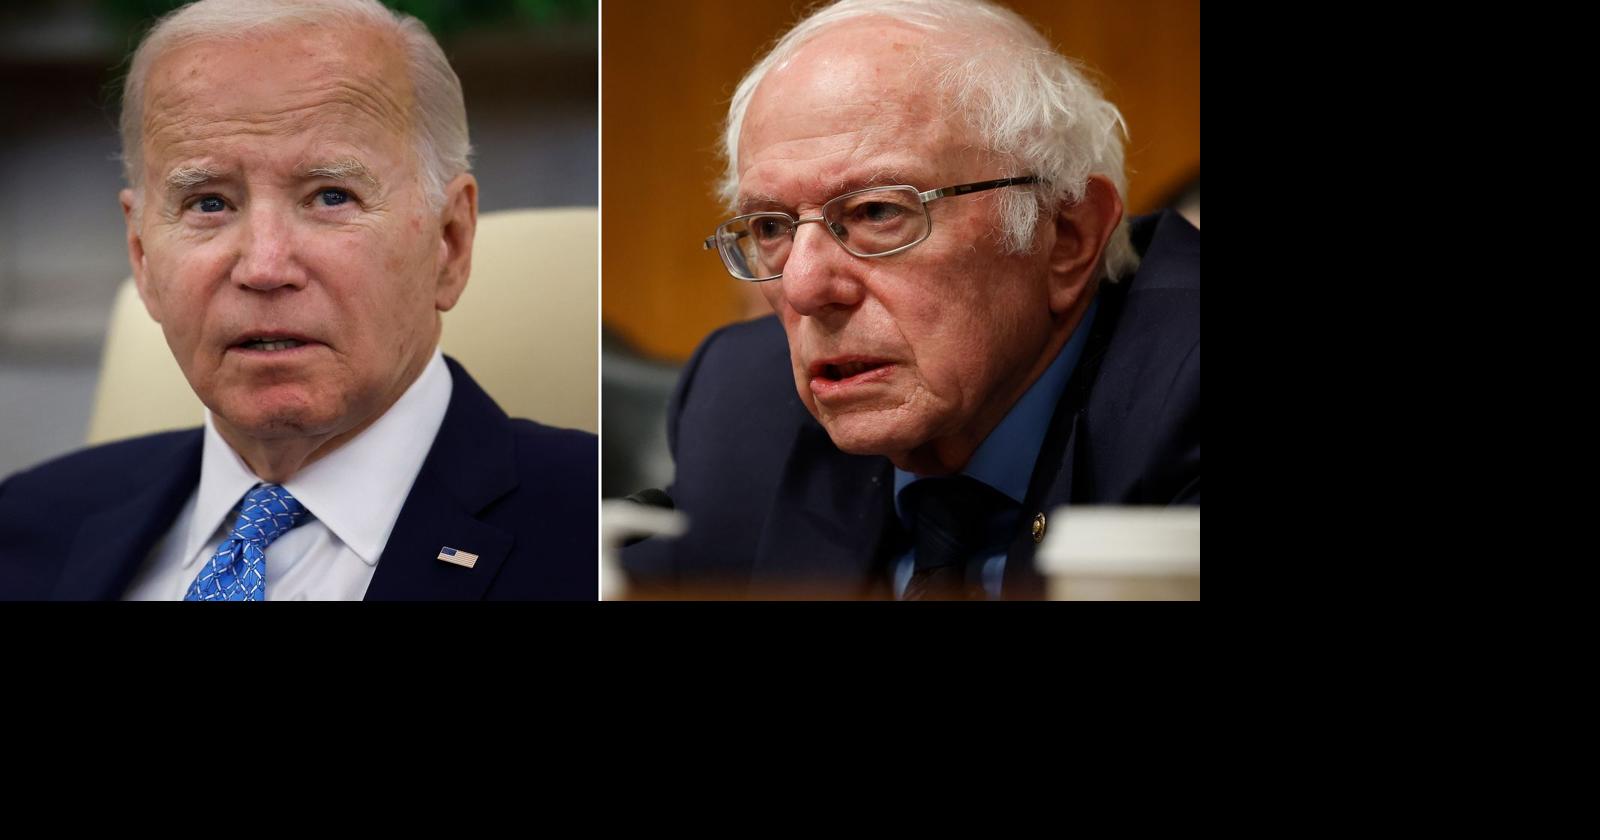 Four years after being rivals, Joe Biden and Bernie Sanders partner to push for lower prescription drug costs